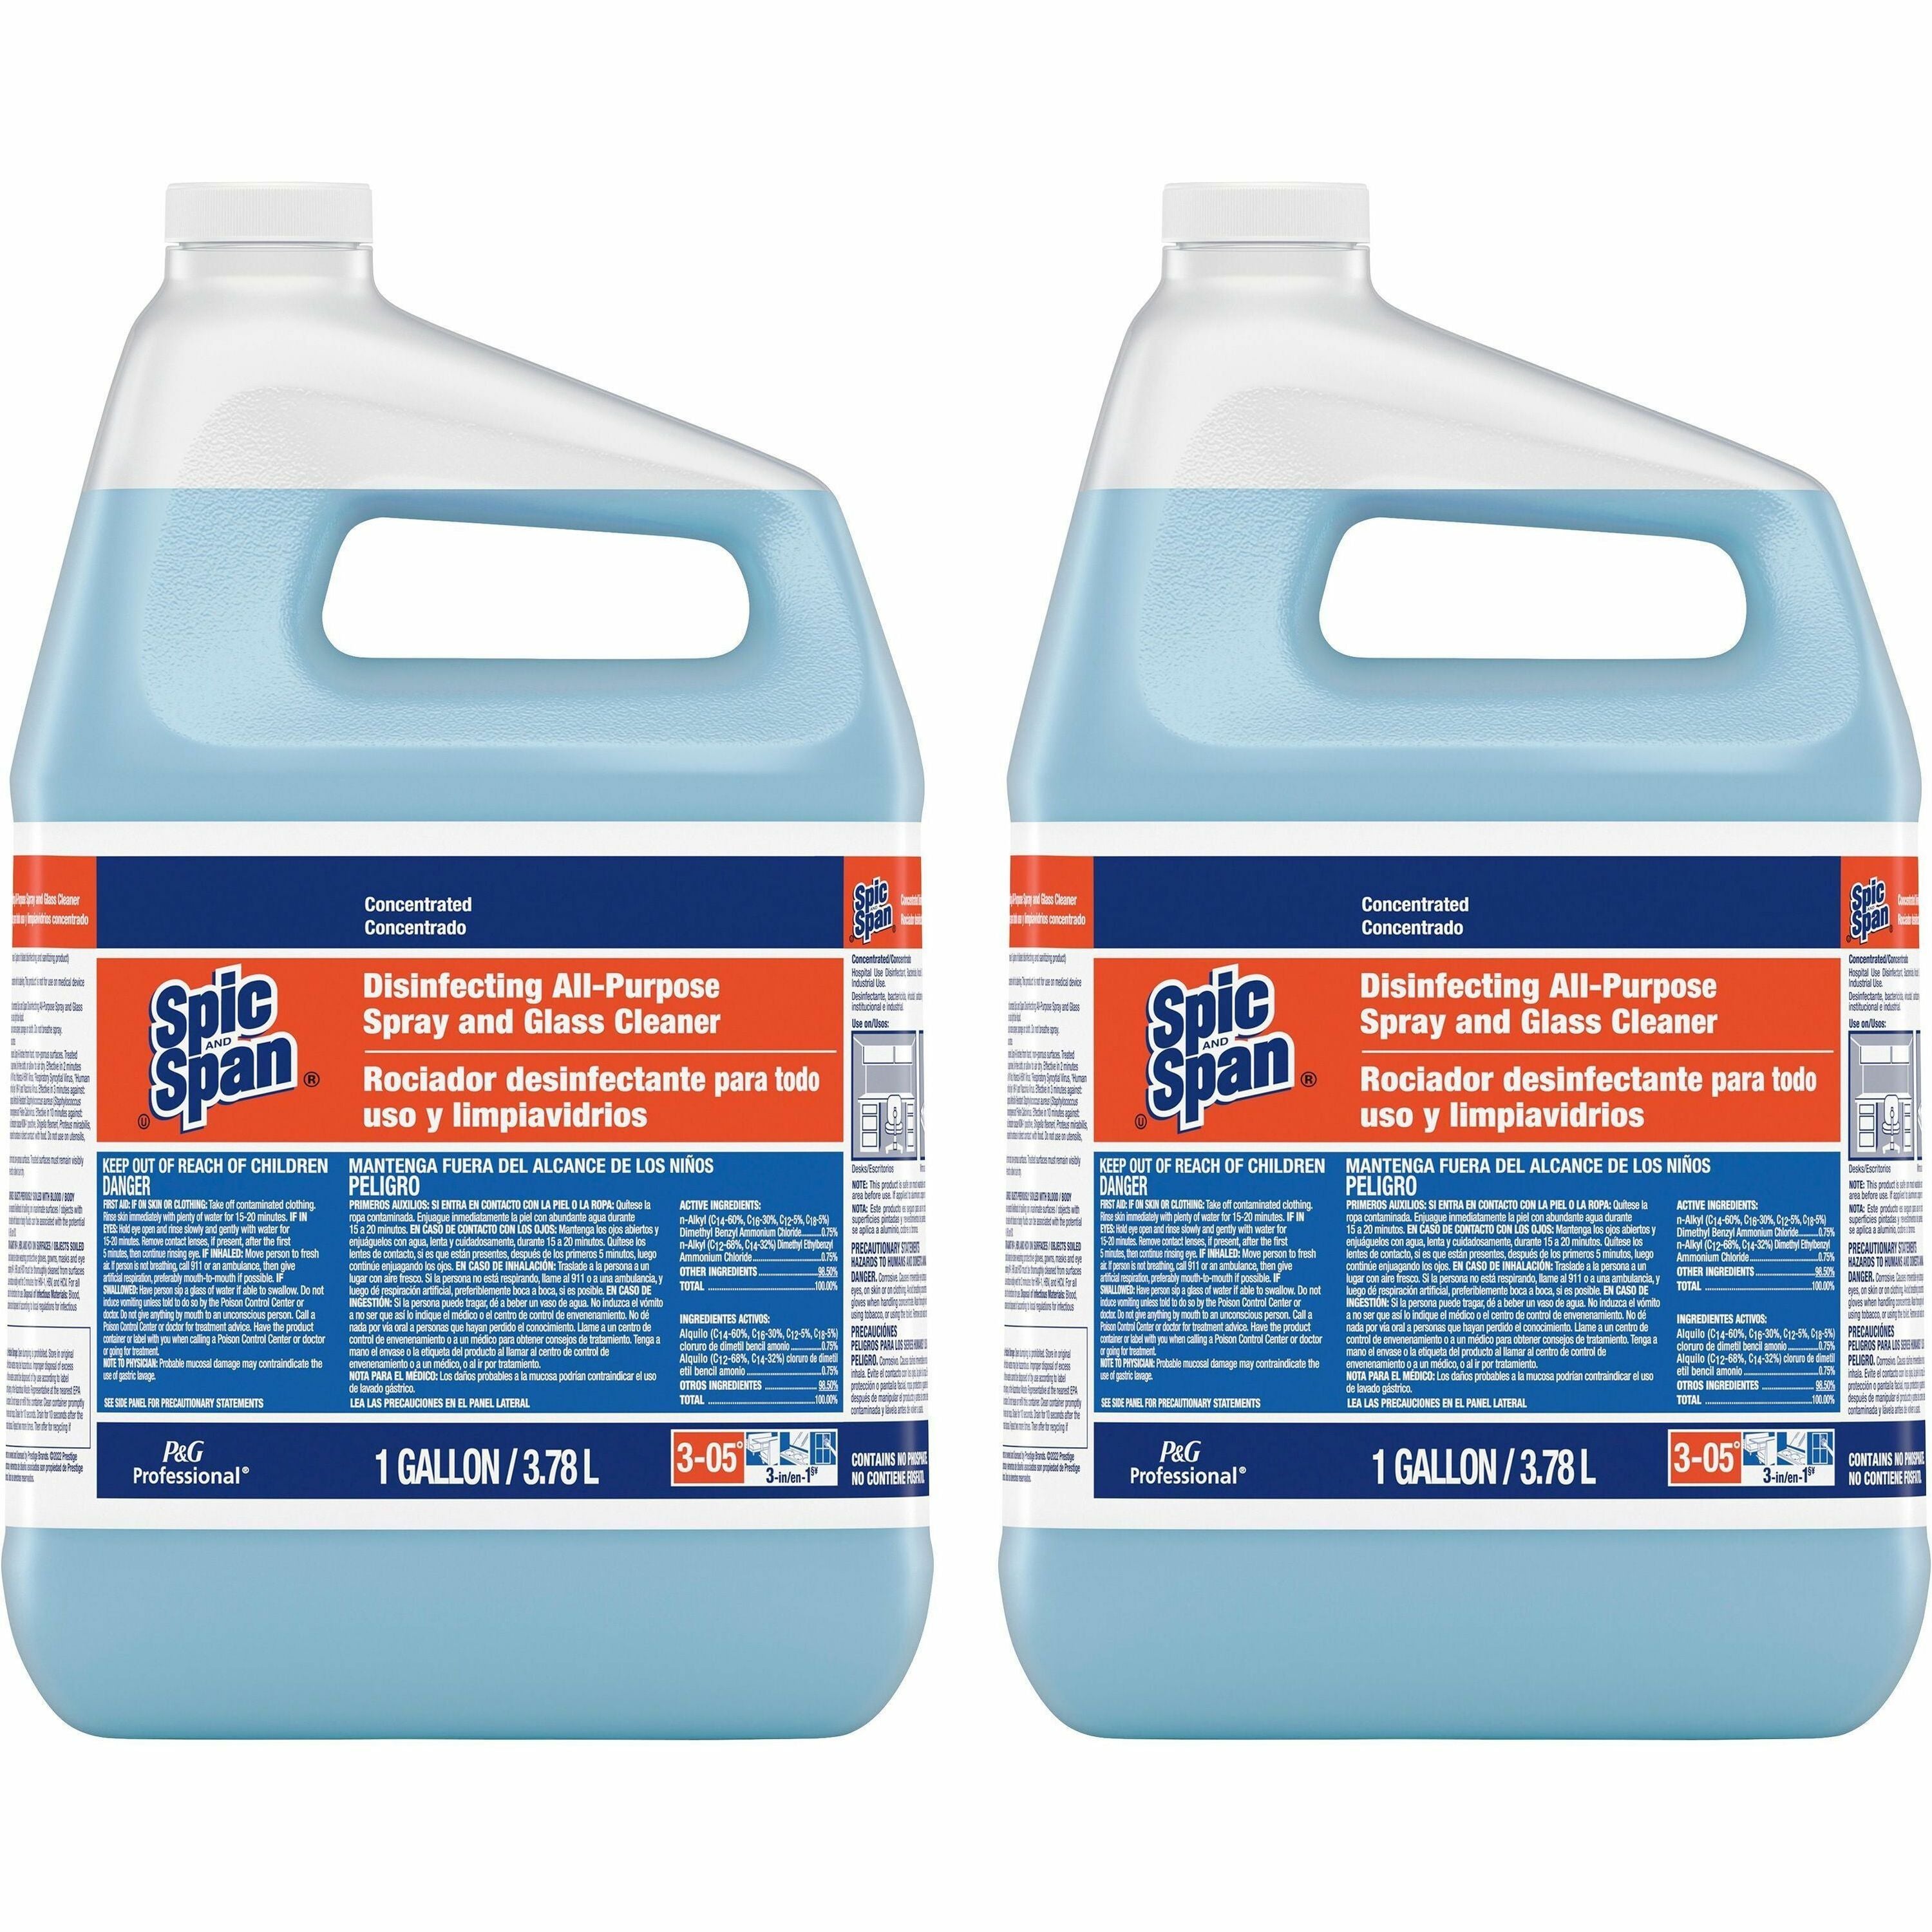 spic-and-span-disinfecting-all-purpose-spray-and-glass-cleaner-for-multipurpose-concentrate-128-fl-oz-4-quart-2-carton-streak-free-disinfectant-clear-blue_pgc32538ct - 1